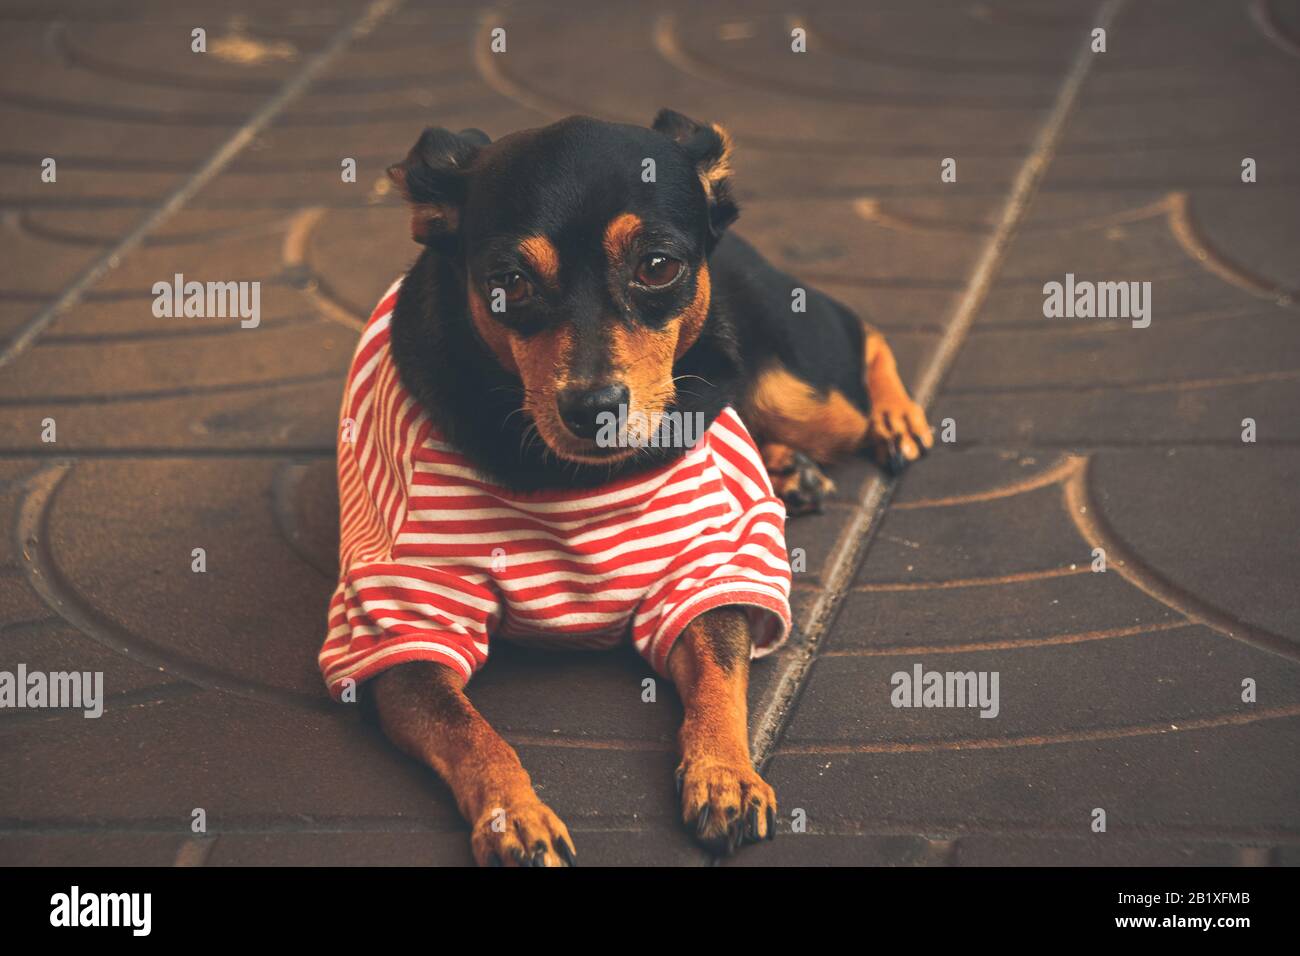 Cute Dachshund wearing a red striped little shirt to show coping ways of home quarantine and social distancing by taking care of pets Stock Photo